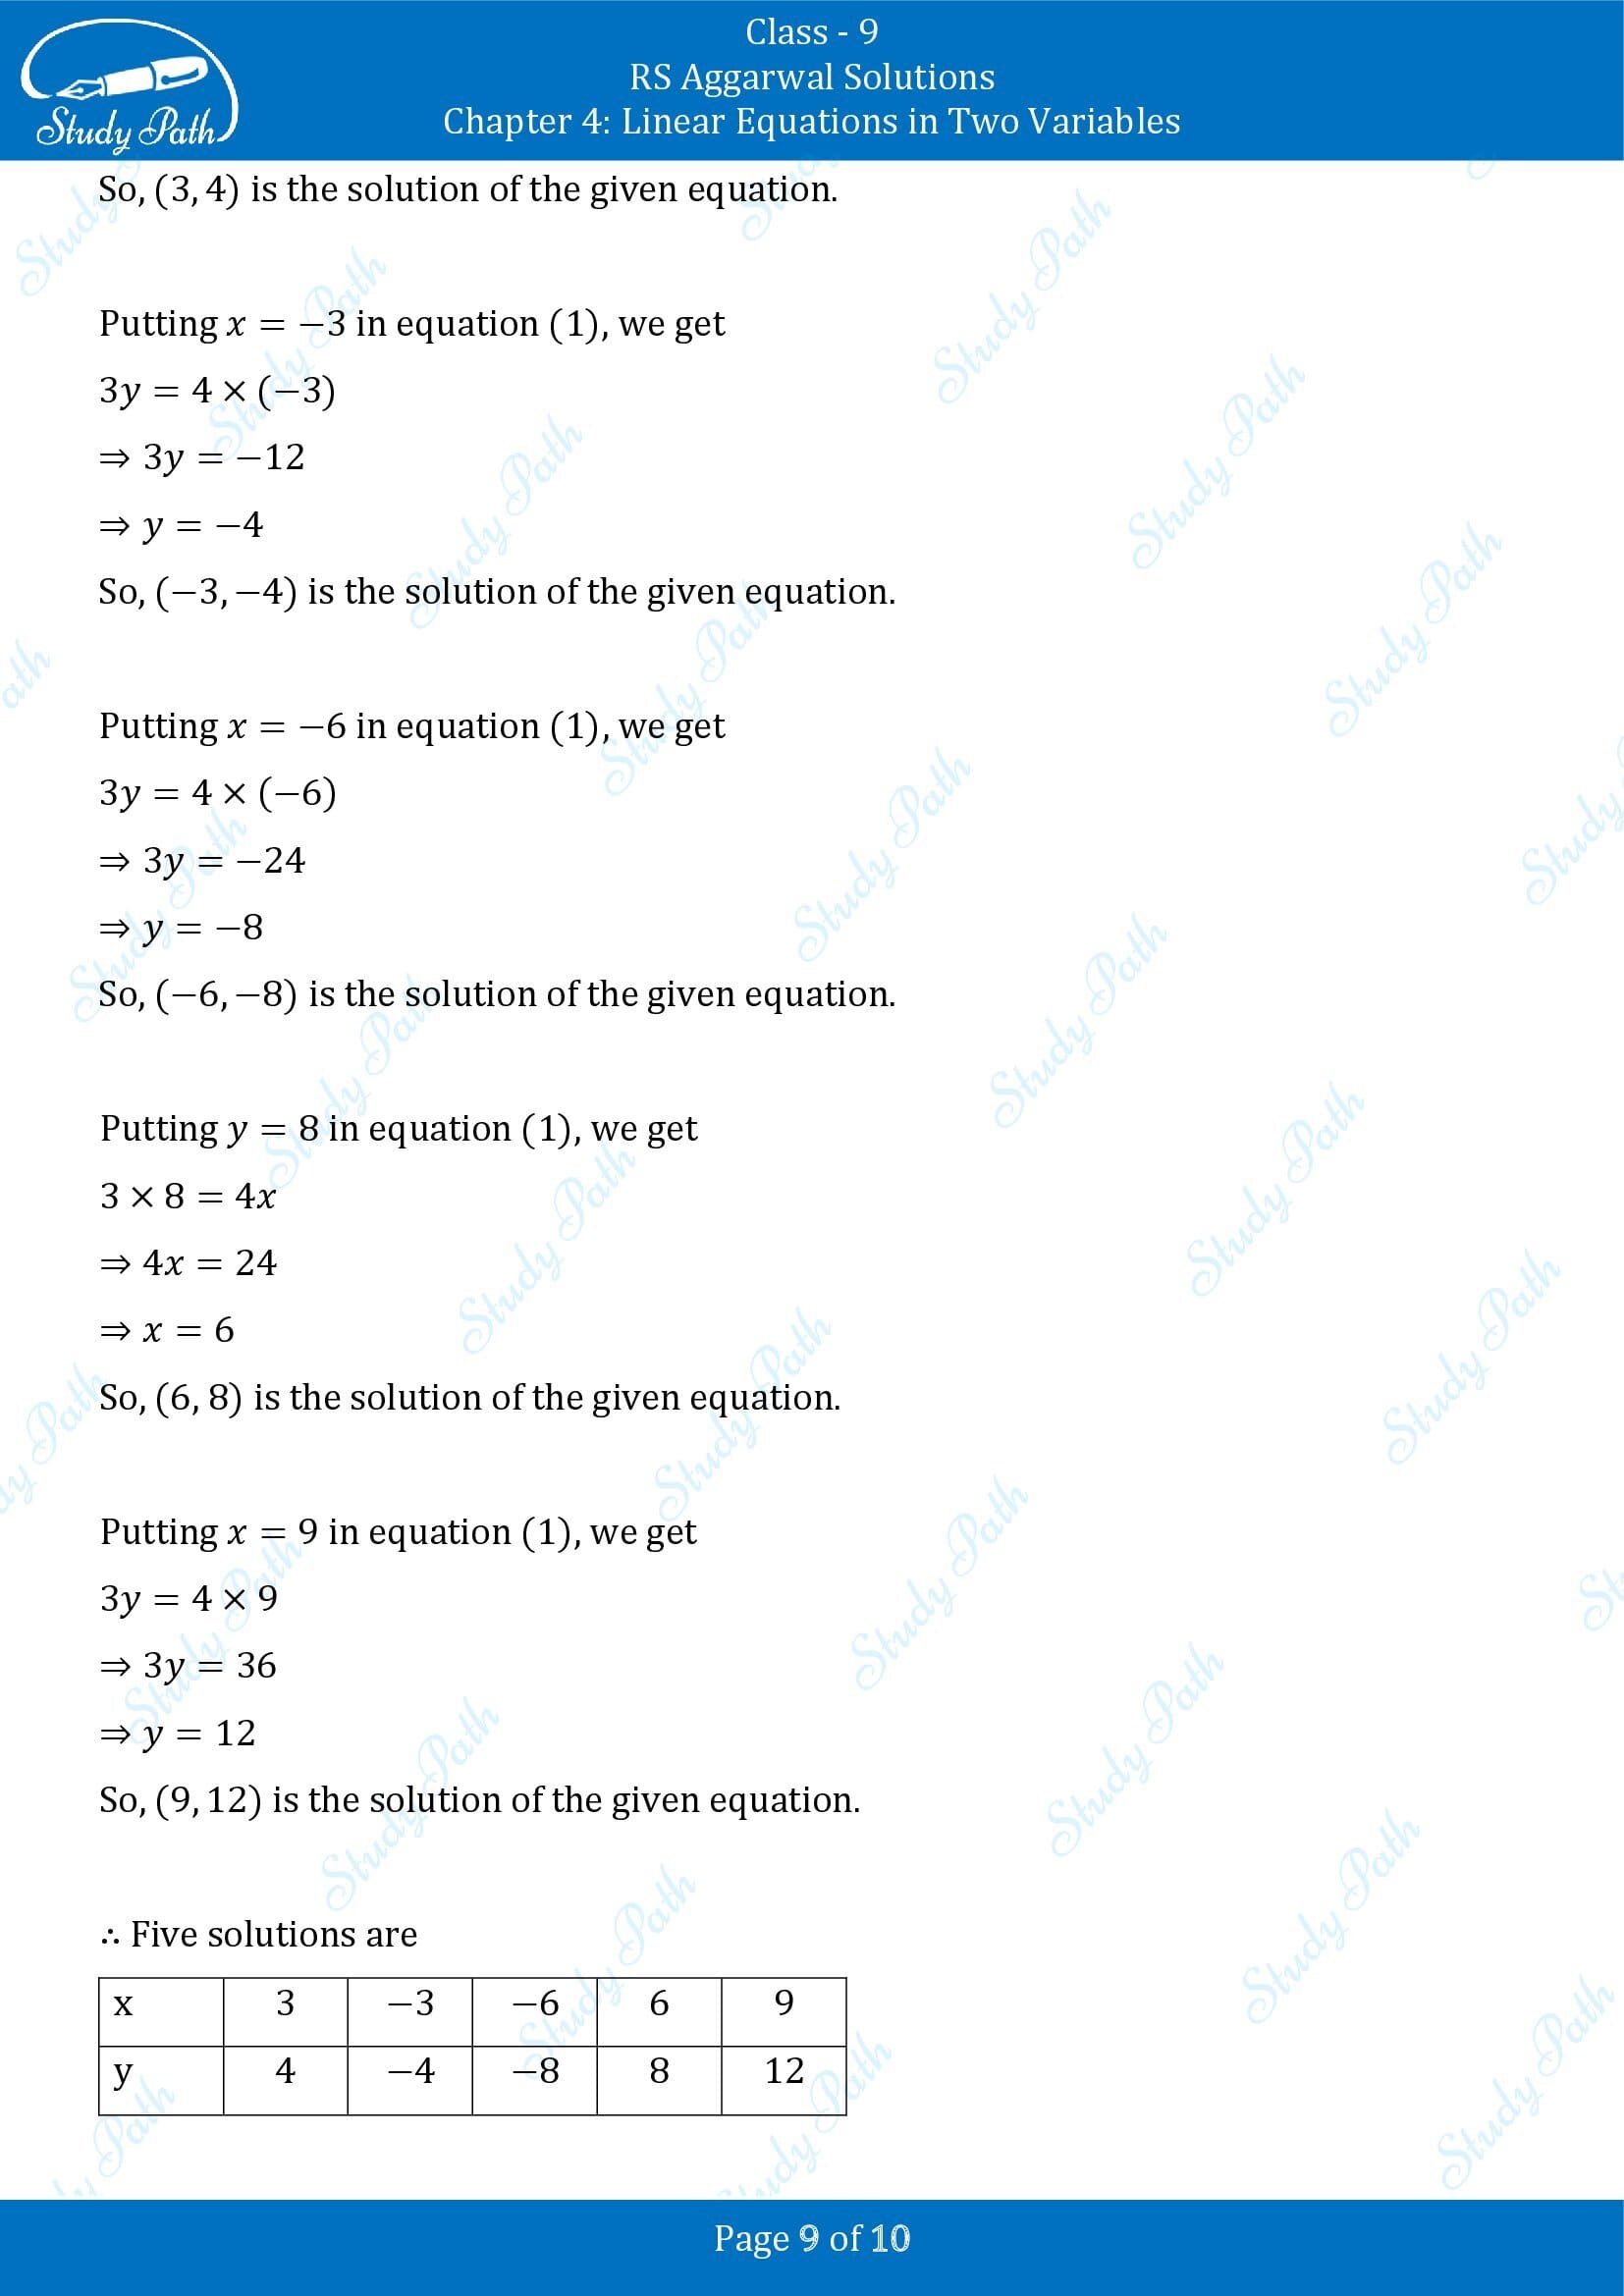 RS Aggarwal Solutions Class 9 Chapter 4 Linear Equations in Two Variables Exercise 4A 0009